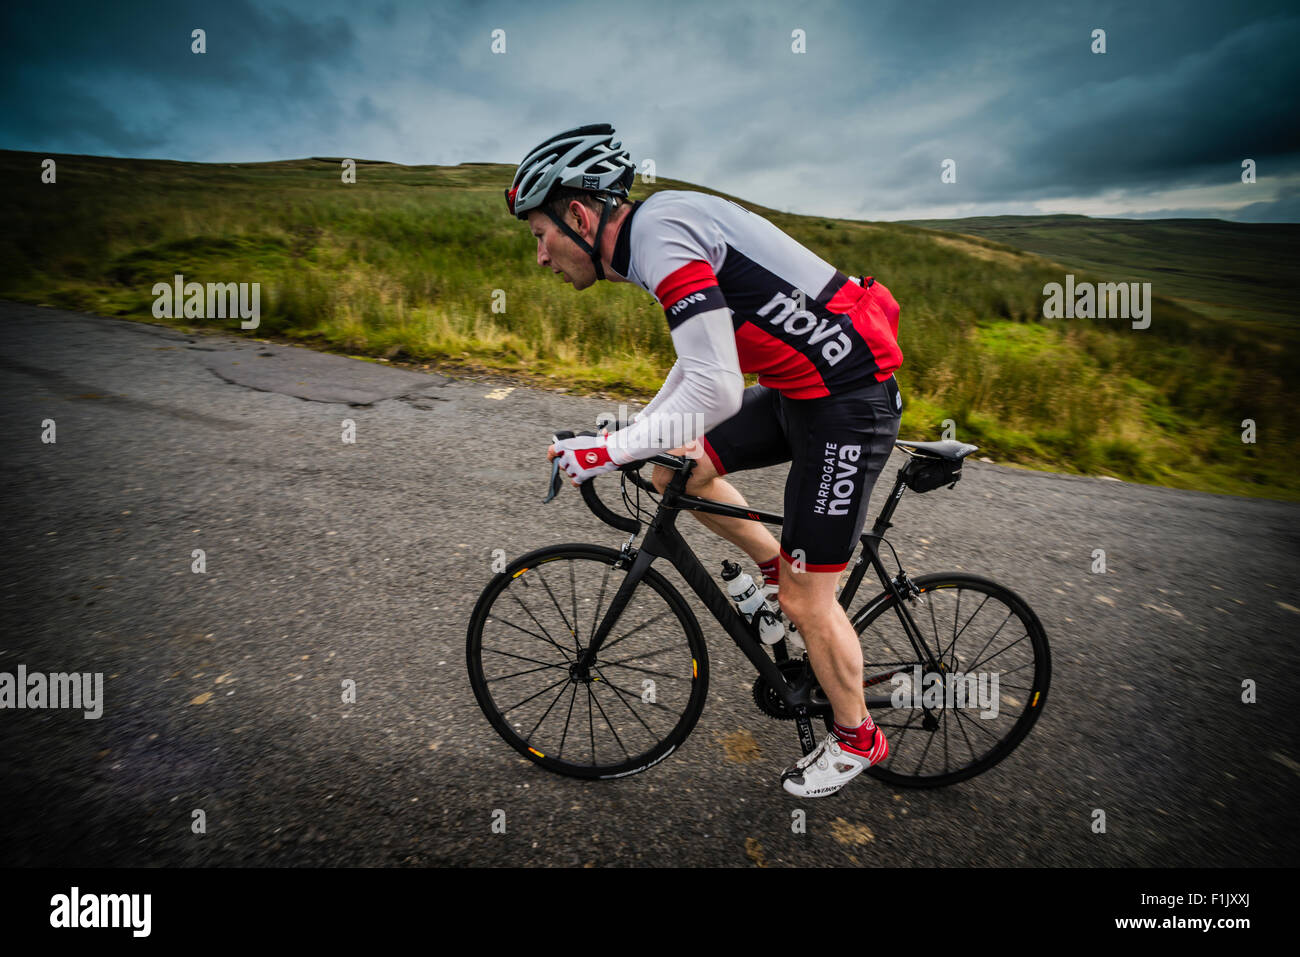 Cyclist taking part in a sportive in the Yorkshire Dales National Park. Stock Photo